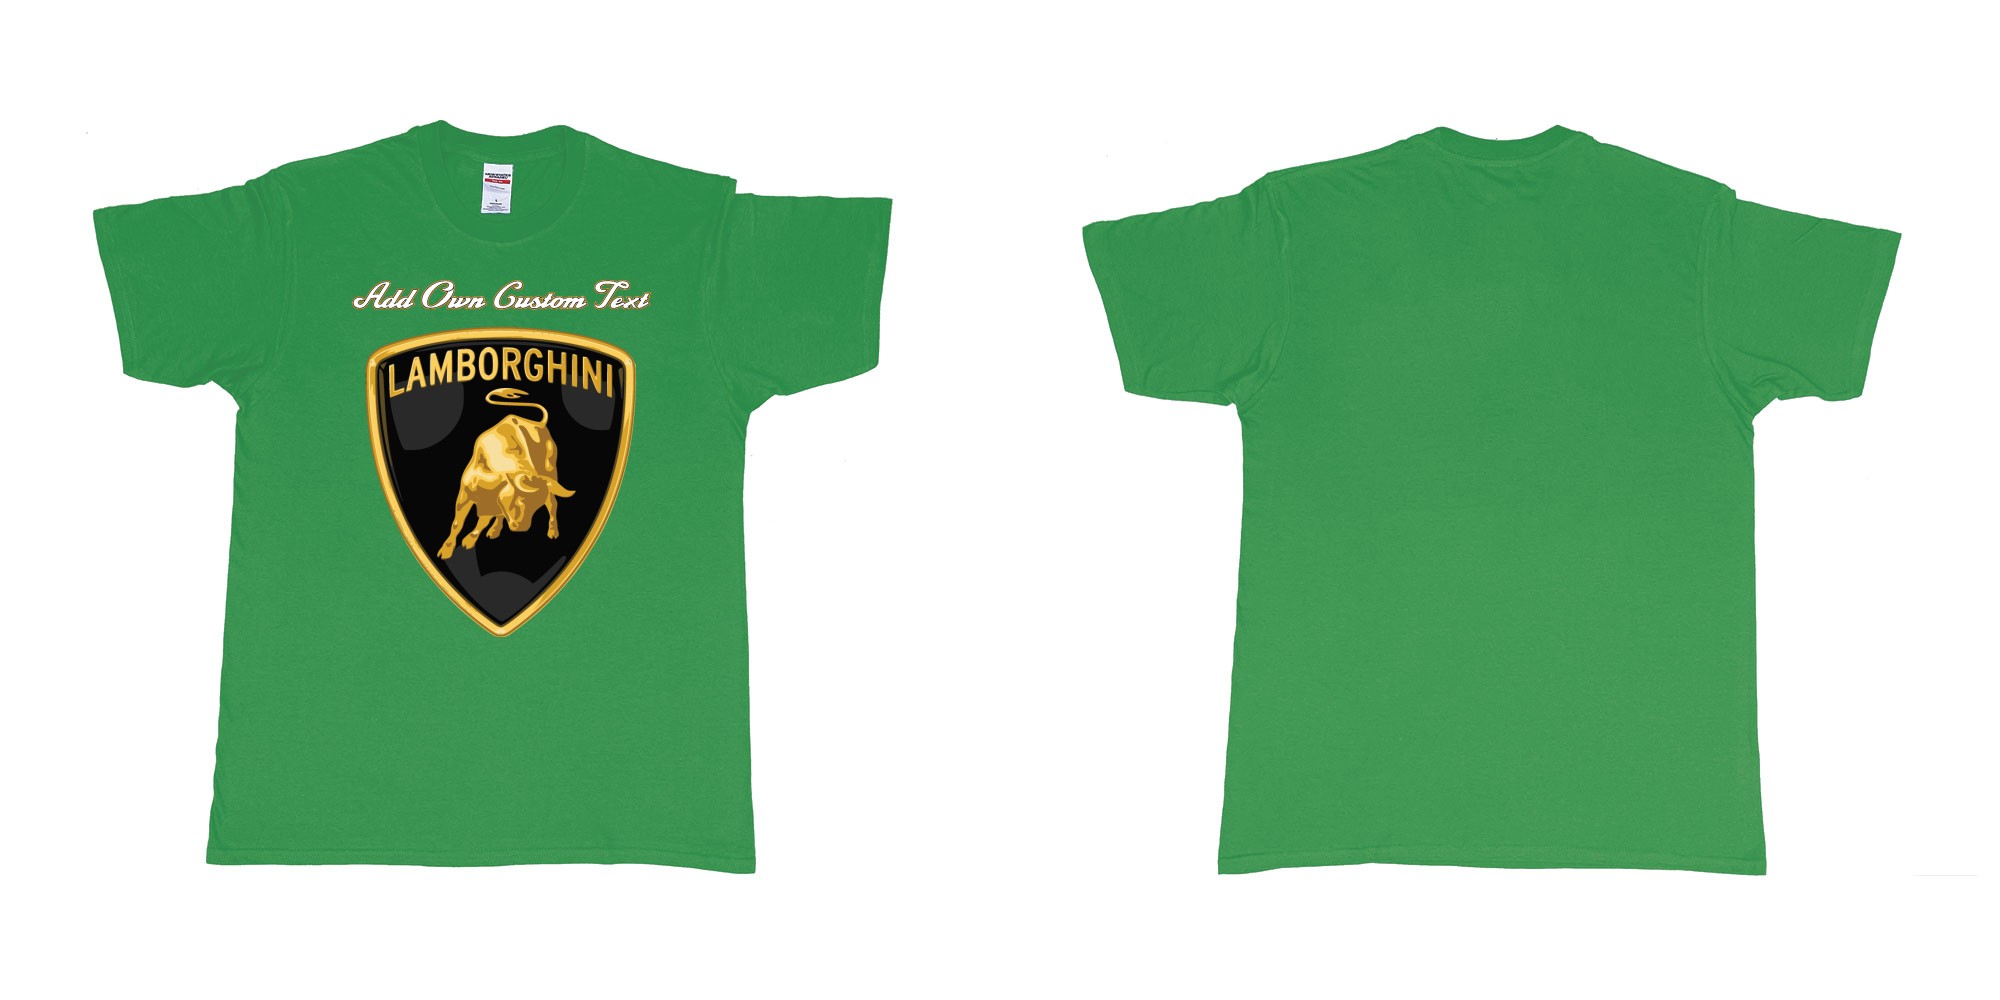 Custom tshirt design lamborghini logo tshirt printing add own text in fabric color irish-green choice your own text made in Bali by The Pirate Way